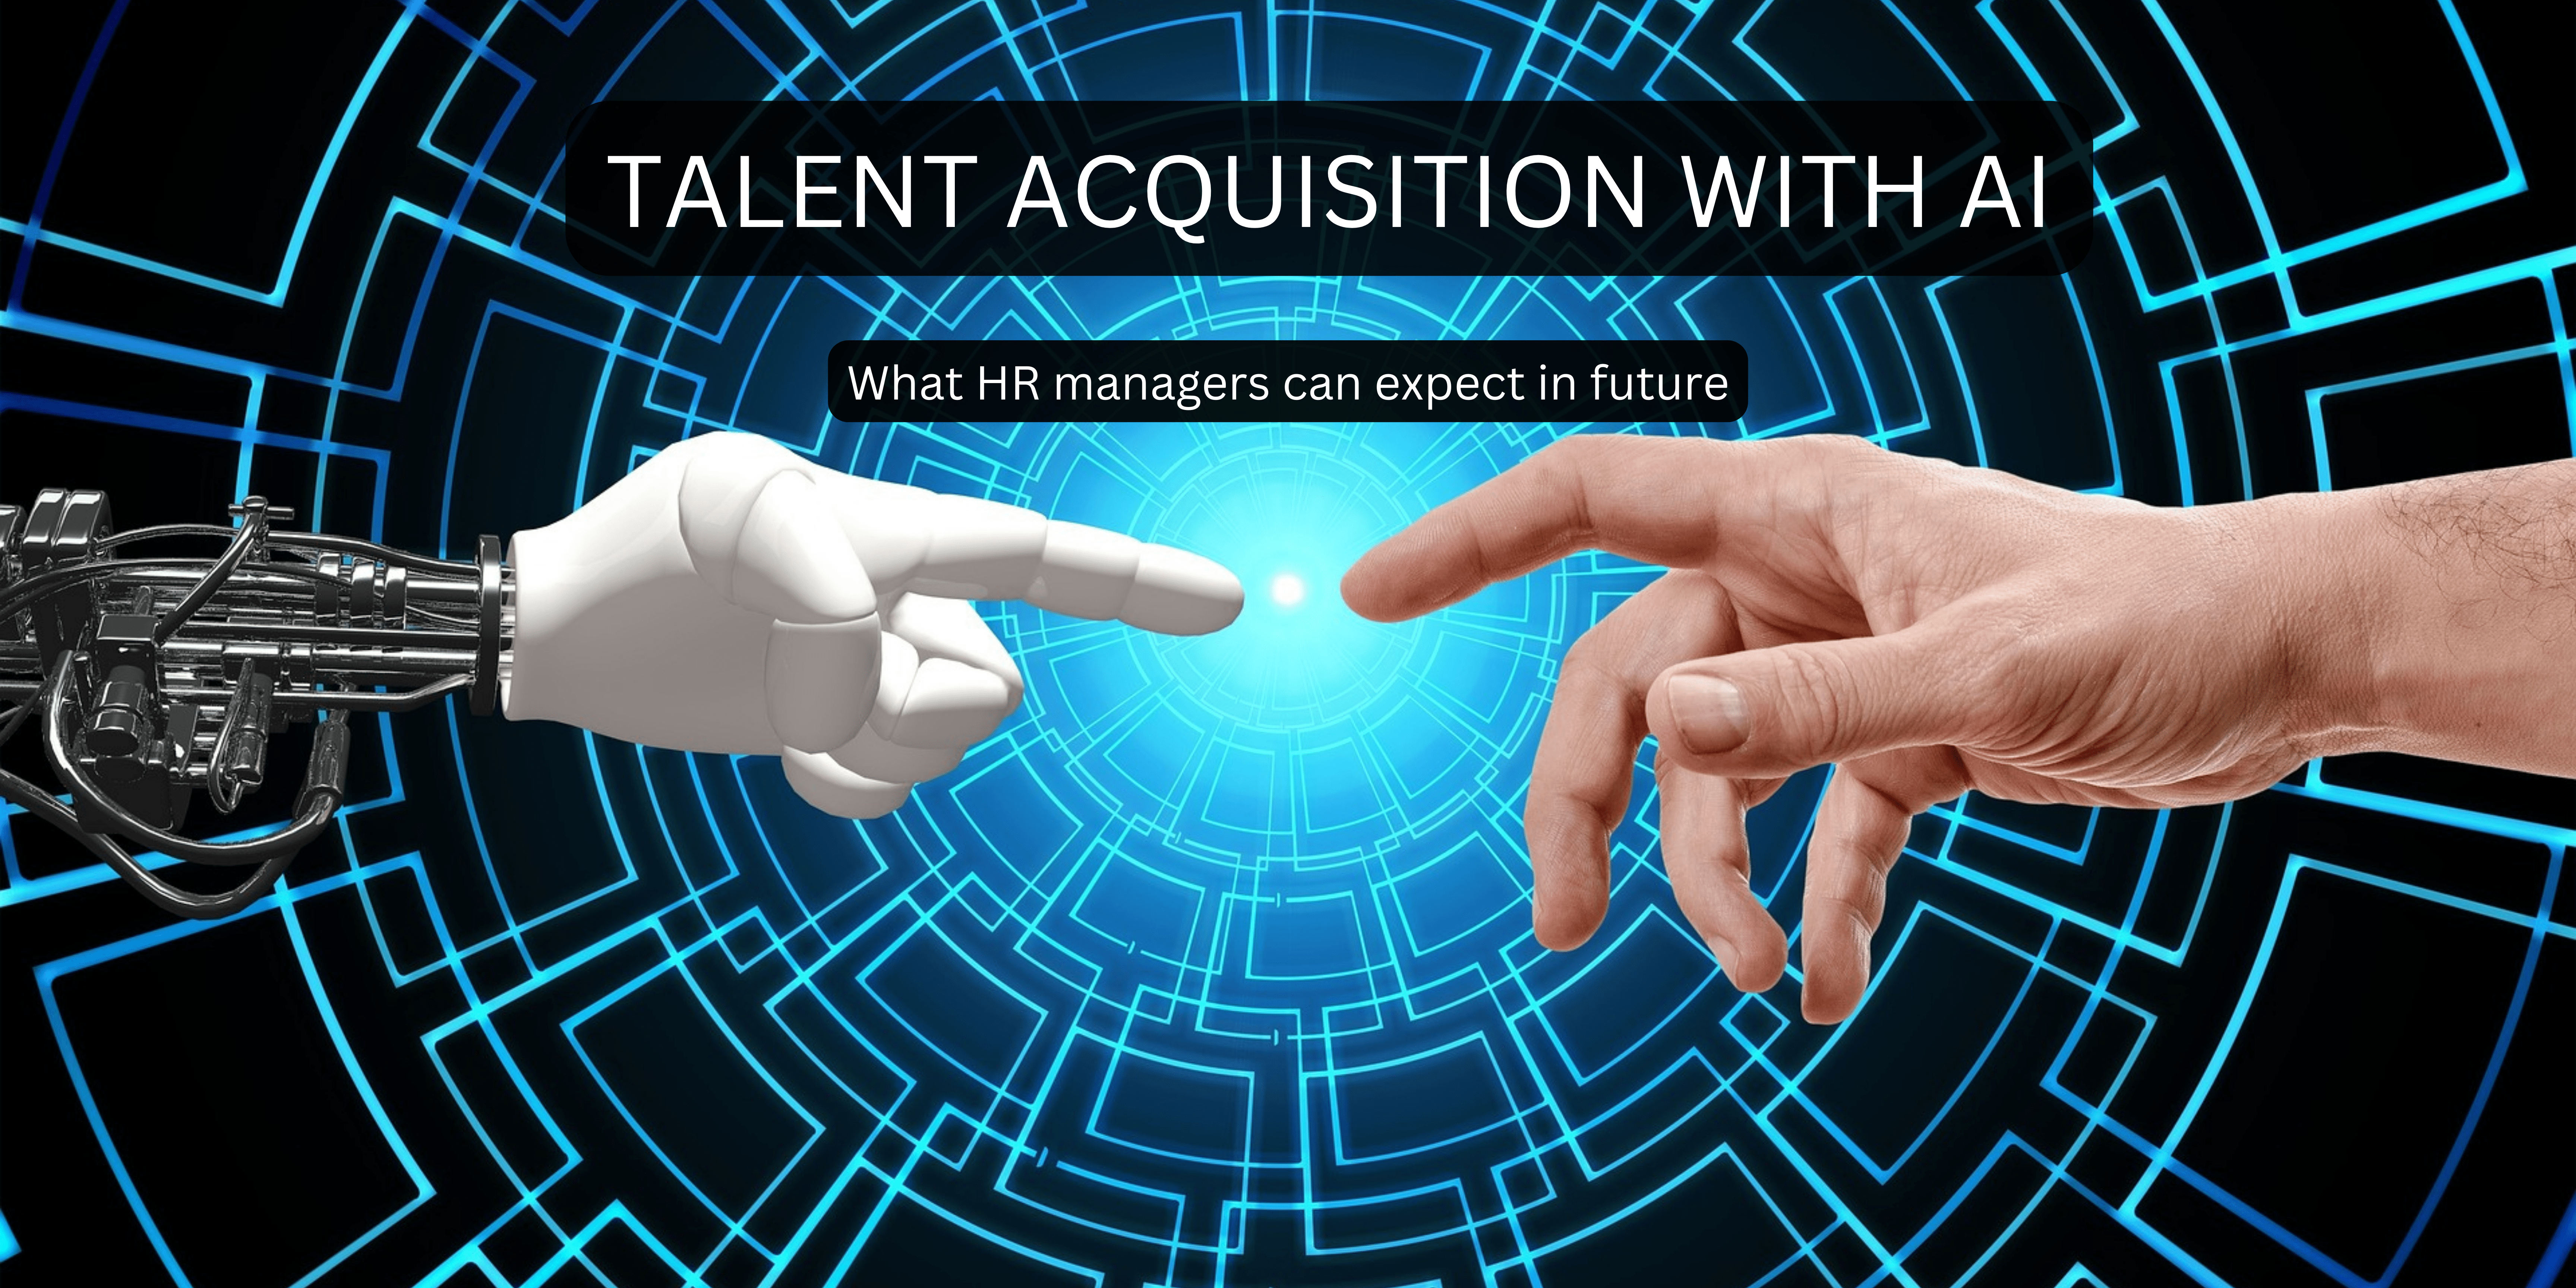 Talent Acquisition with AI: What HR Managers can Expect in Future